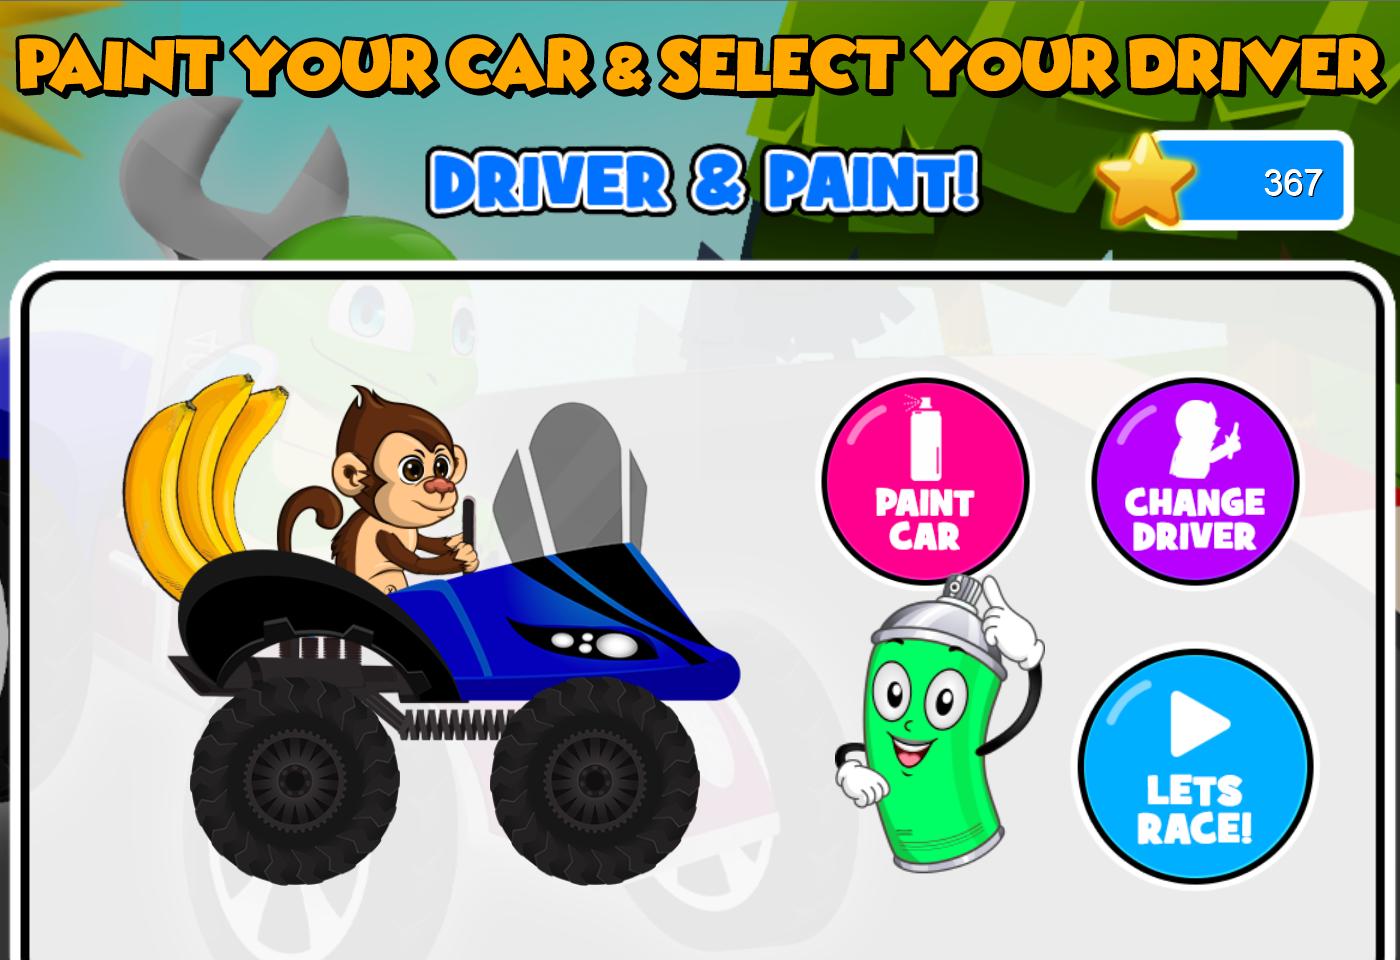 Fun Kids Car Racing Game For Android Apk Download - free roblox game download fun for kids